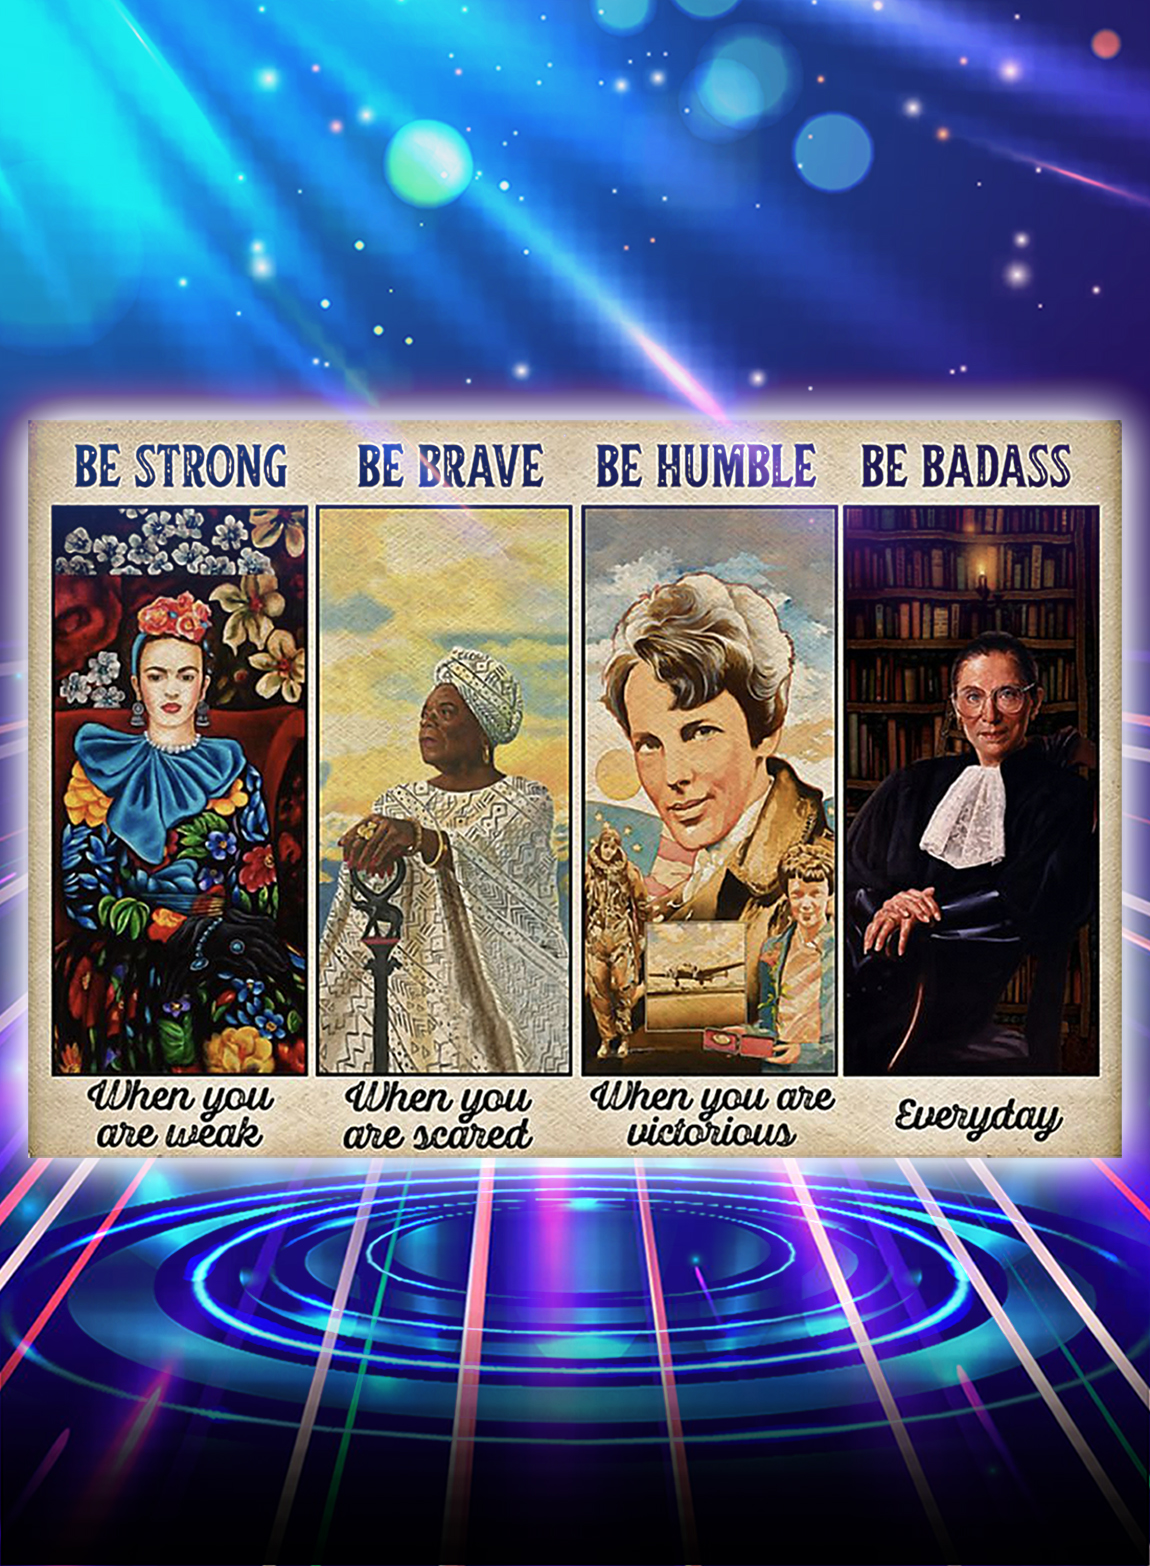 Feminist Frida Kahlo RBG be strong be brave be humble be badass poster - A2